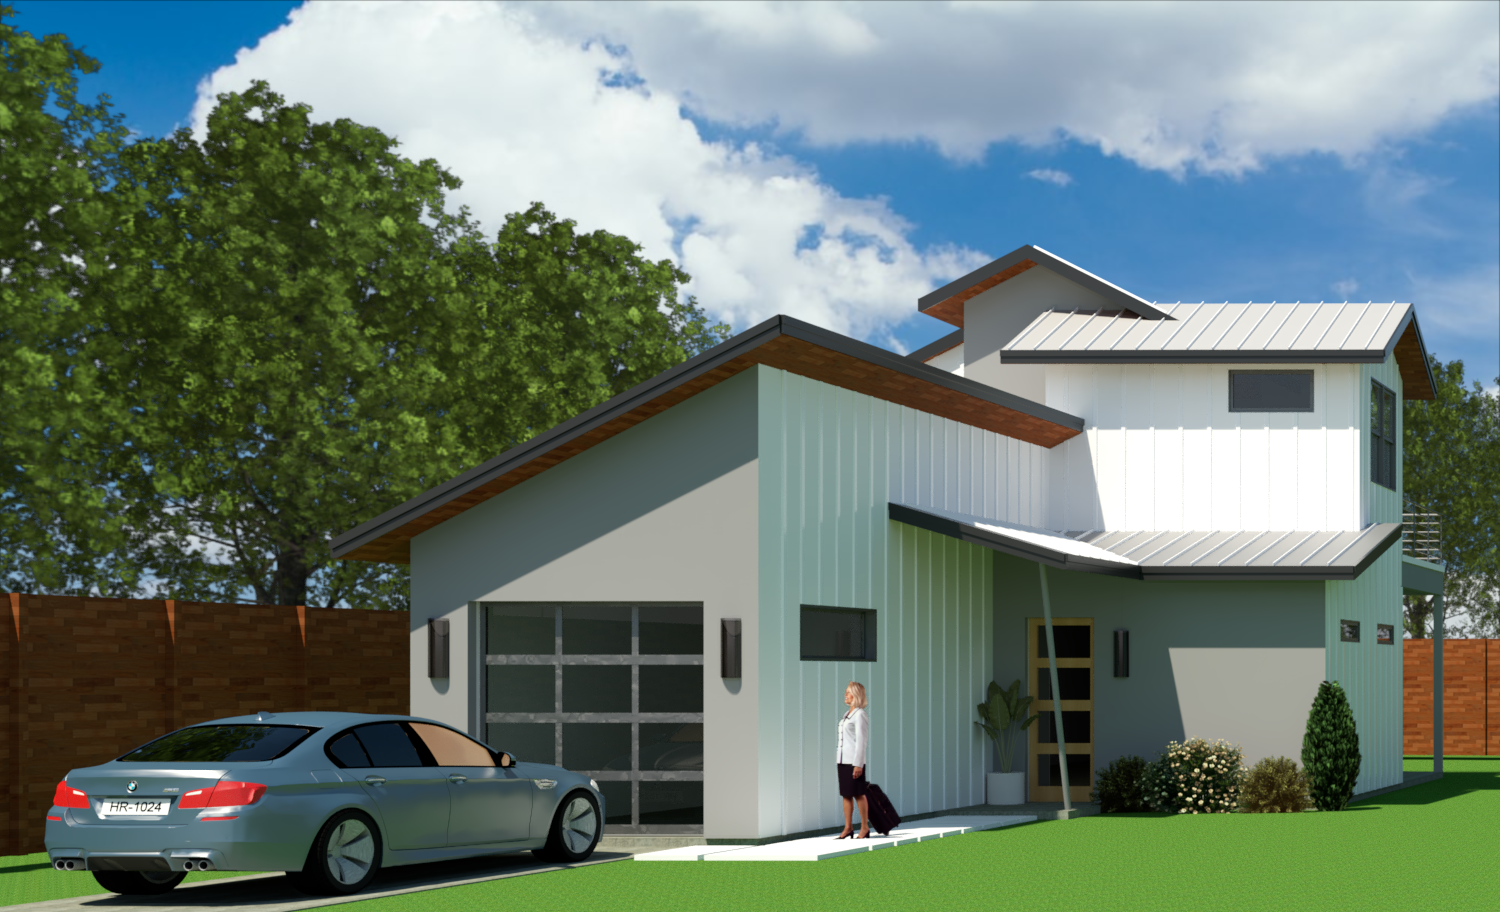 The 200 Tillery Square, Building 2 will be <b>AVAILABLE SUMMER 2022</b>. It is an exciting new modern home with 2 Bedrooms, 2.5 Bathrooms, and a 1-Car Garage.